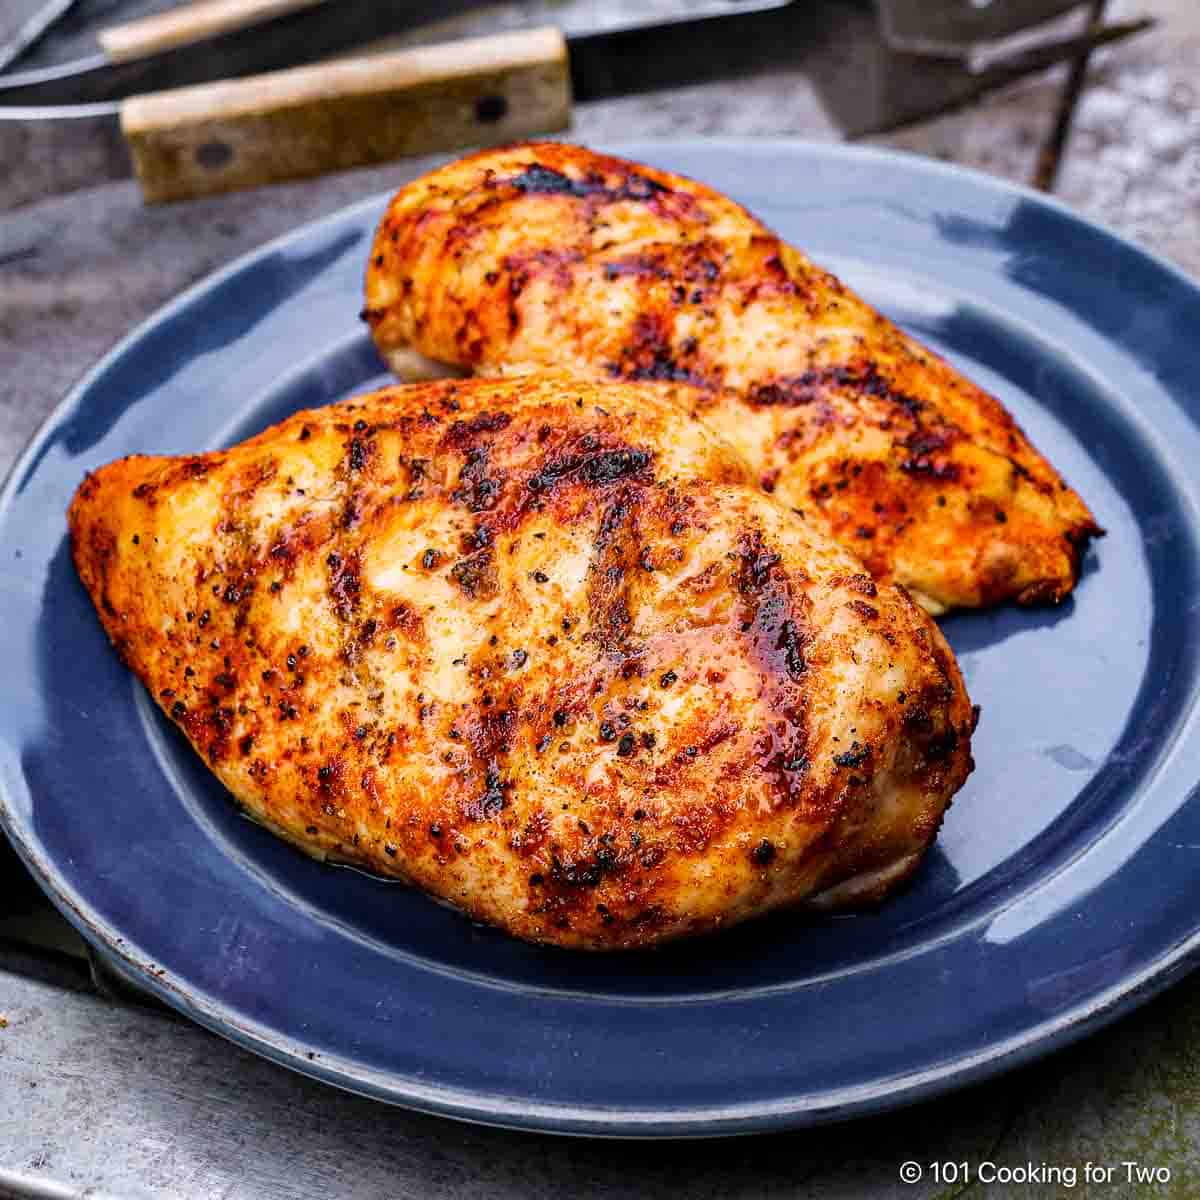 Grilled Chicken Breasts on a blue plate.